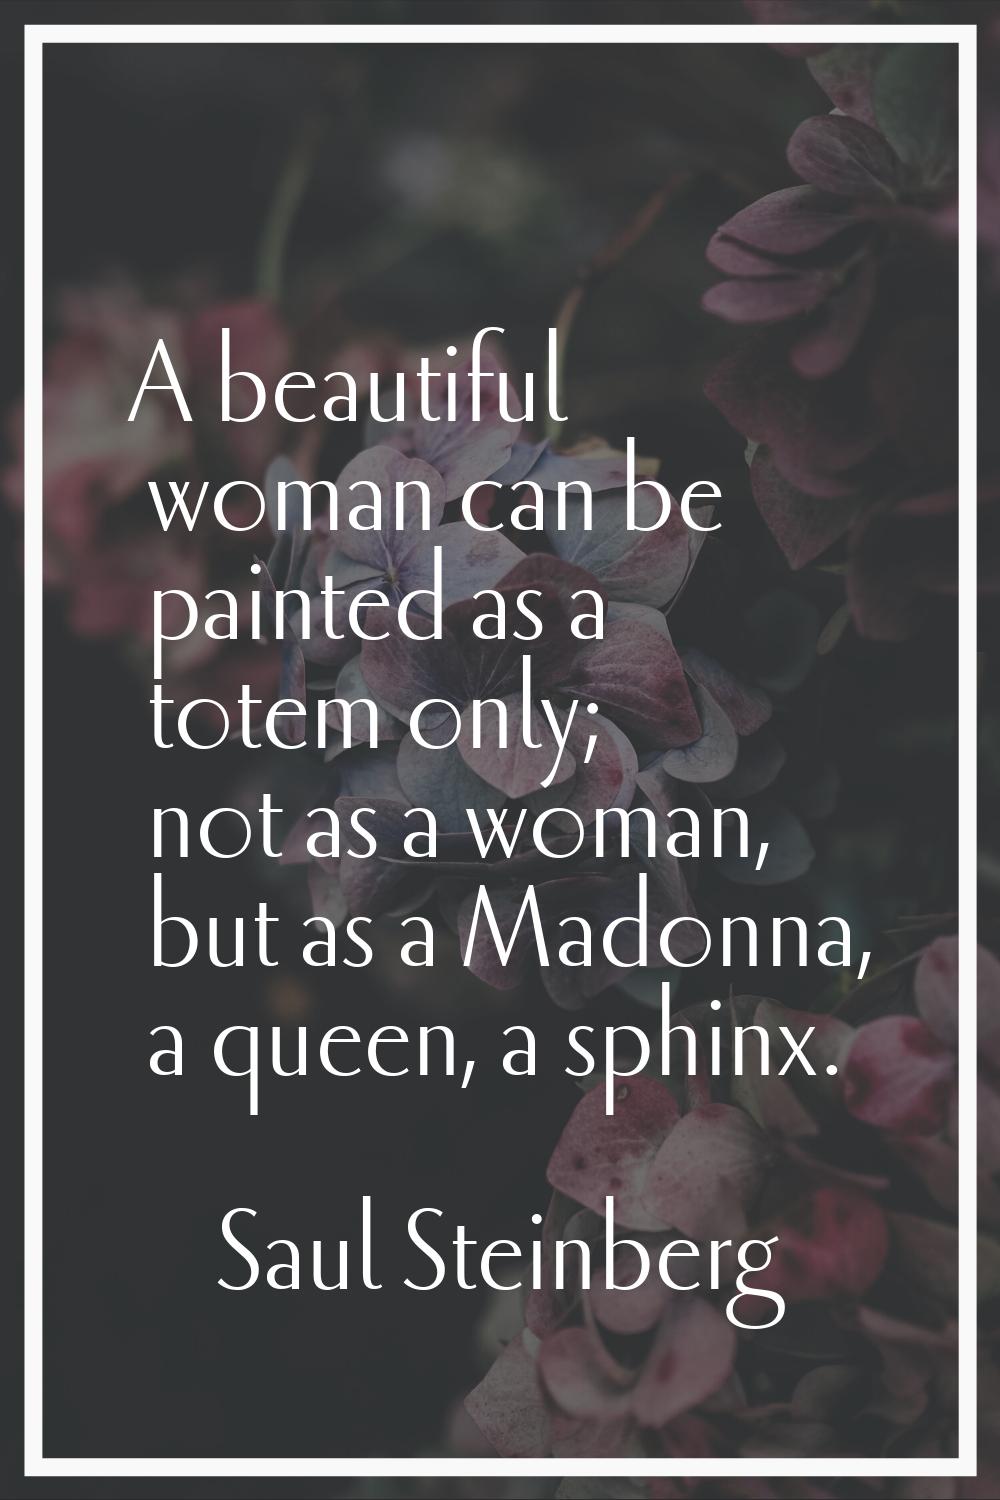 A beautiful woman can be painted as a totem only; not as a woman, but as a Madonna, a queen, a sphi